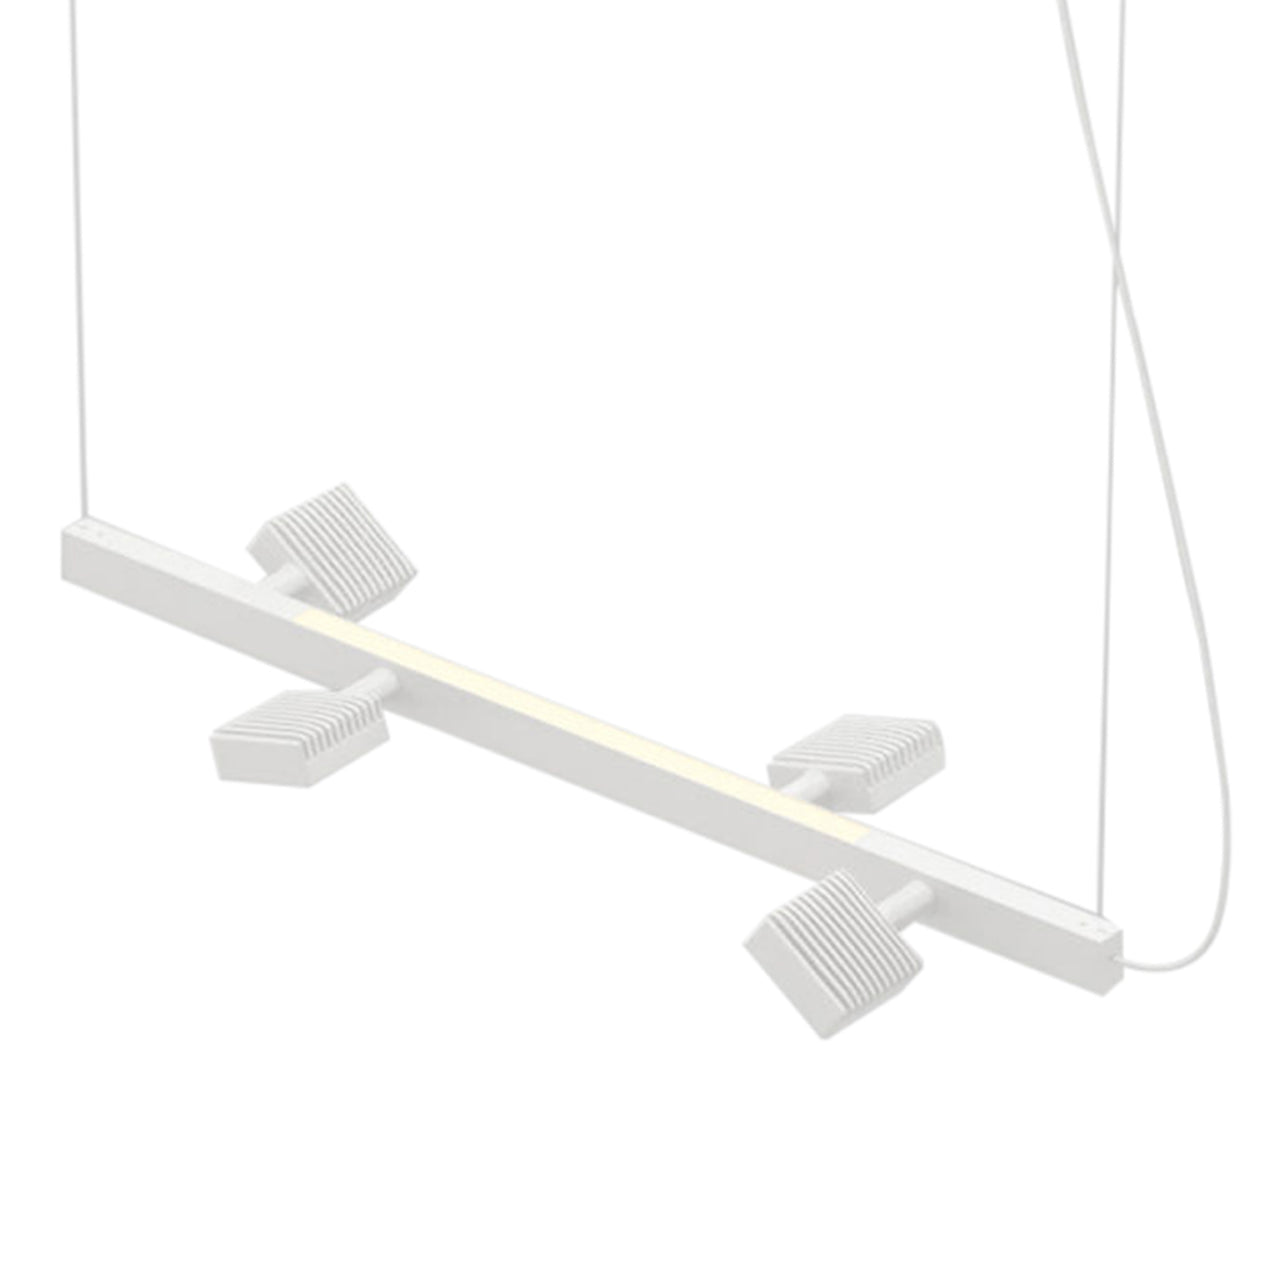 Dorval 05 Suspension Lamp with Uplight: 4 Heads + Large - 96.1